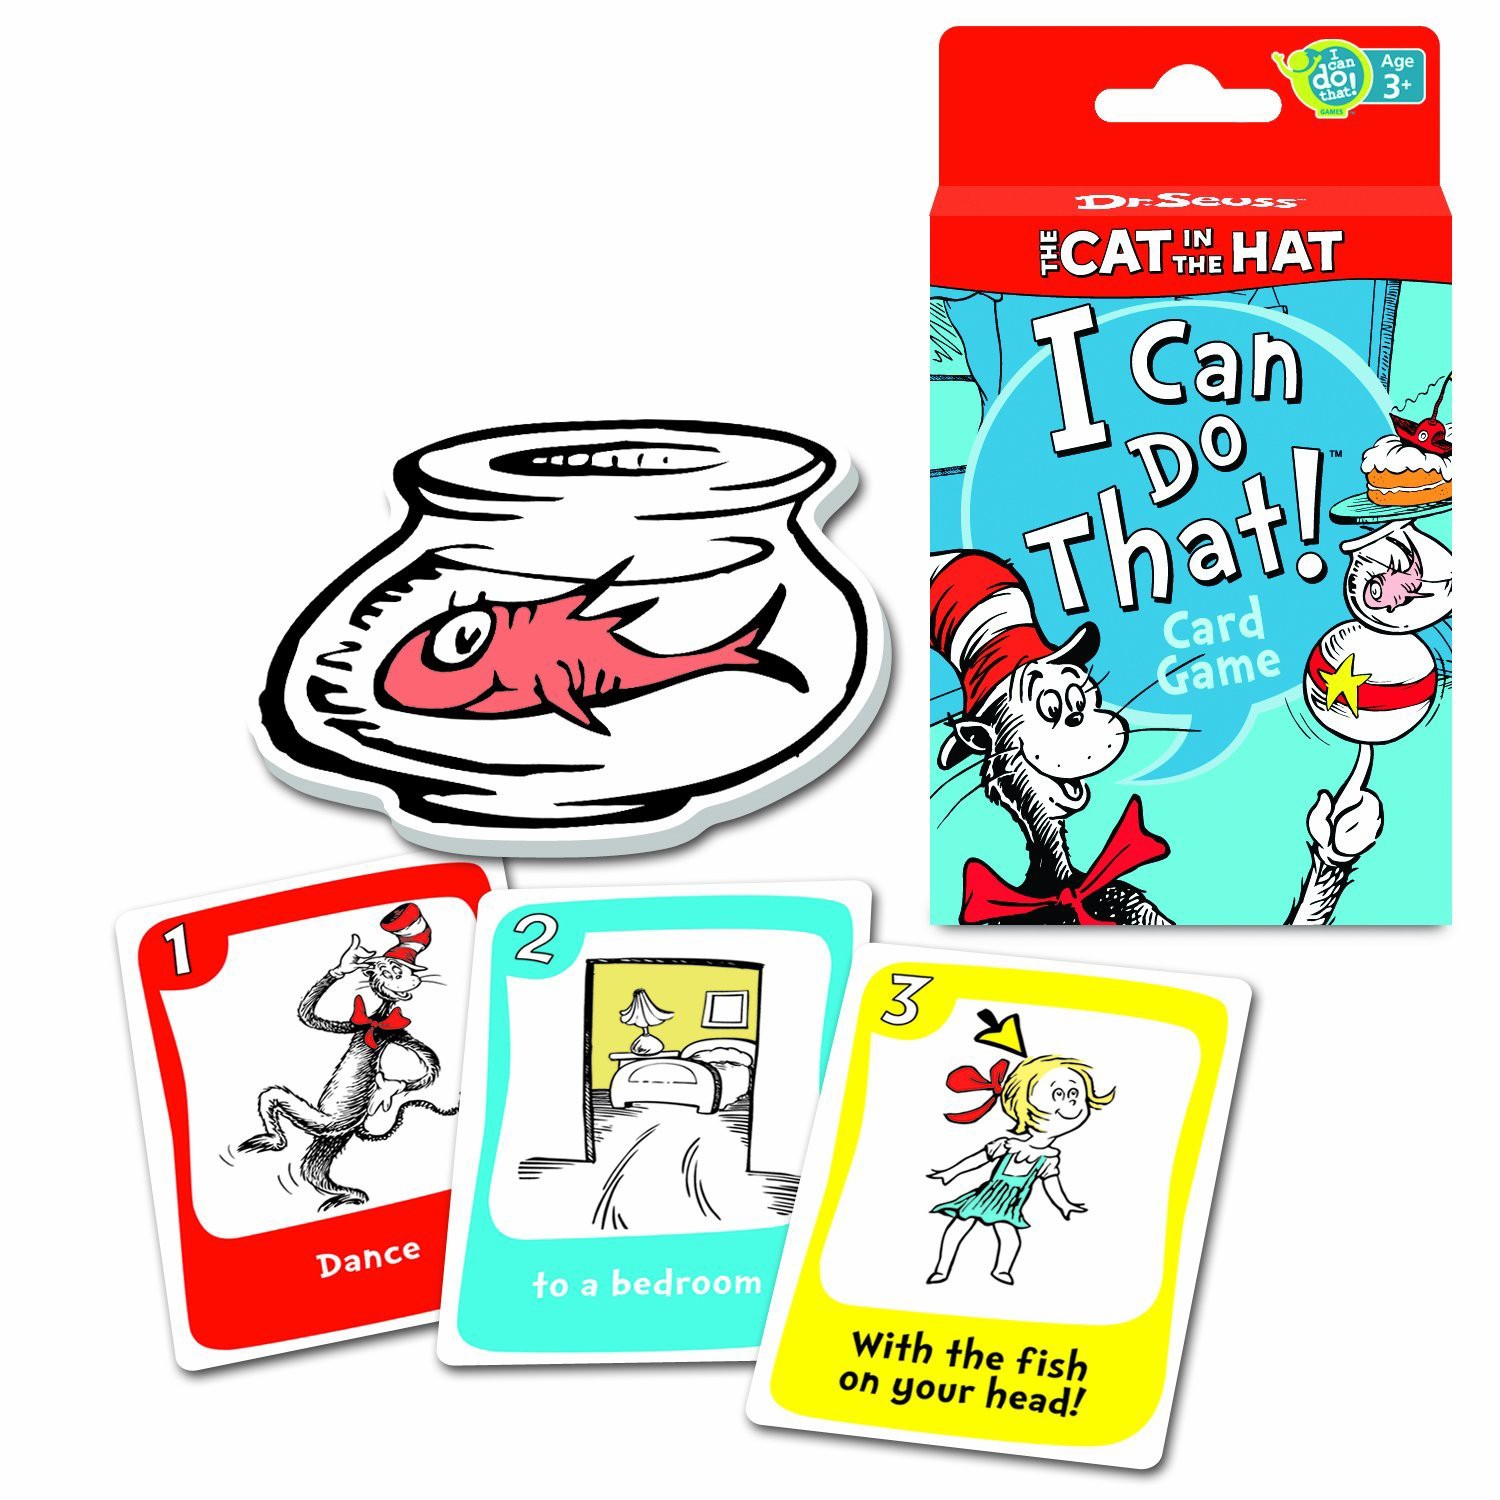 Dr. Seuss Cat in the Hat I Can do That Card Game